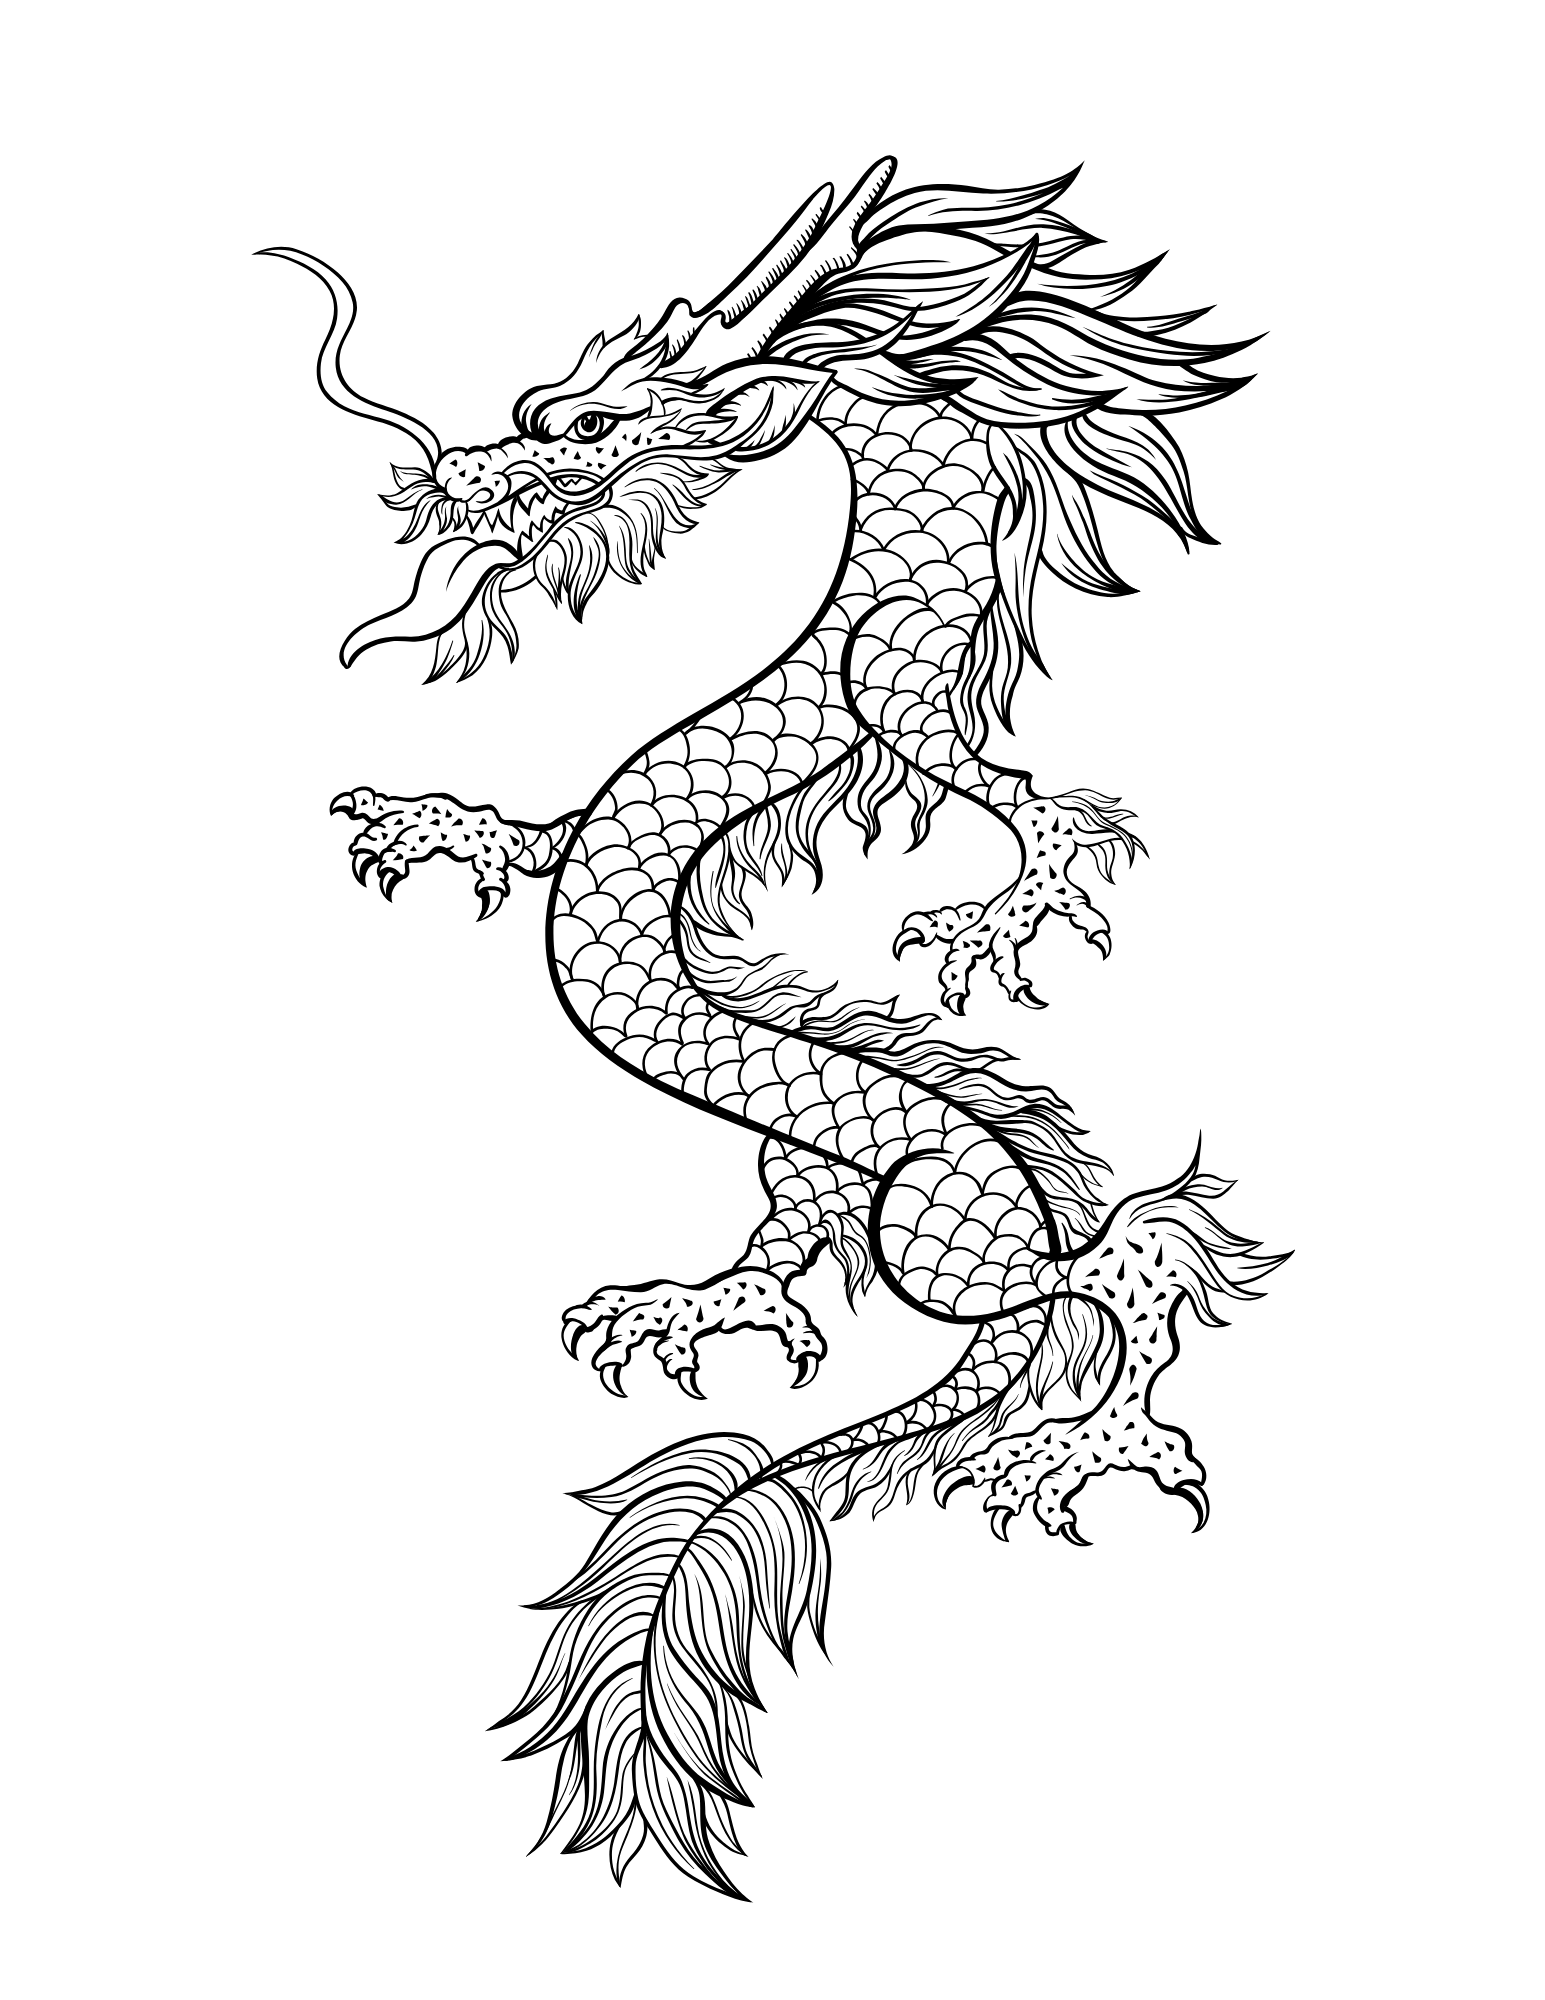 20 Dragons Coloring Book Adults Kids Coloring Pages, Instant